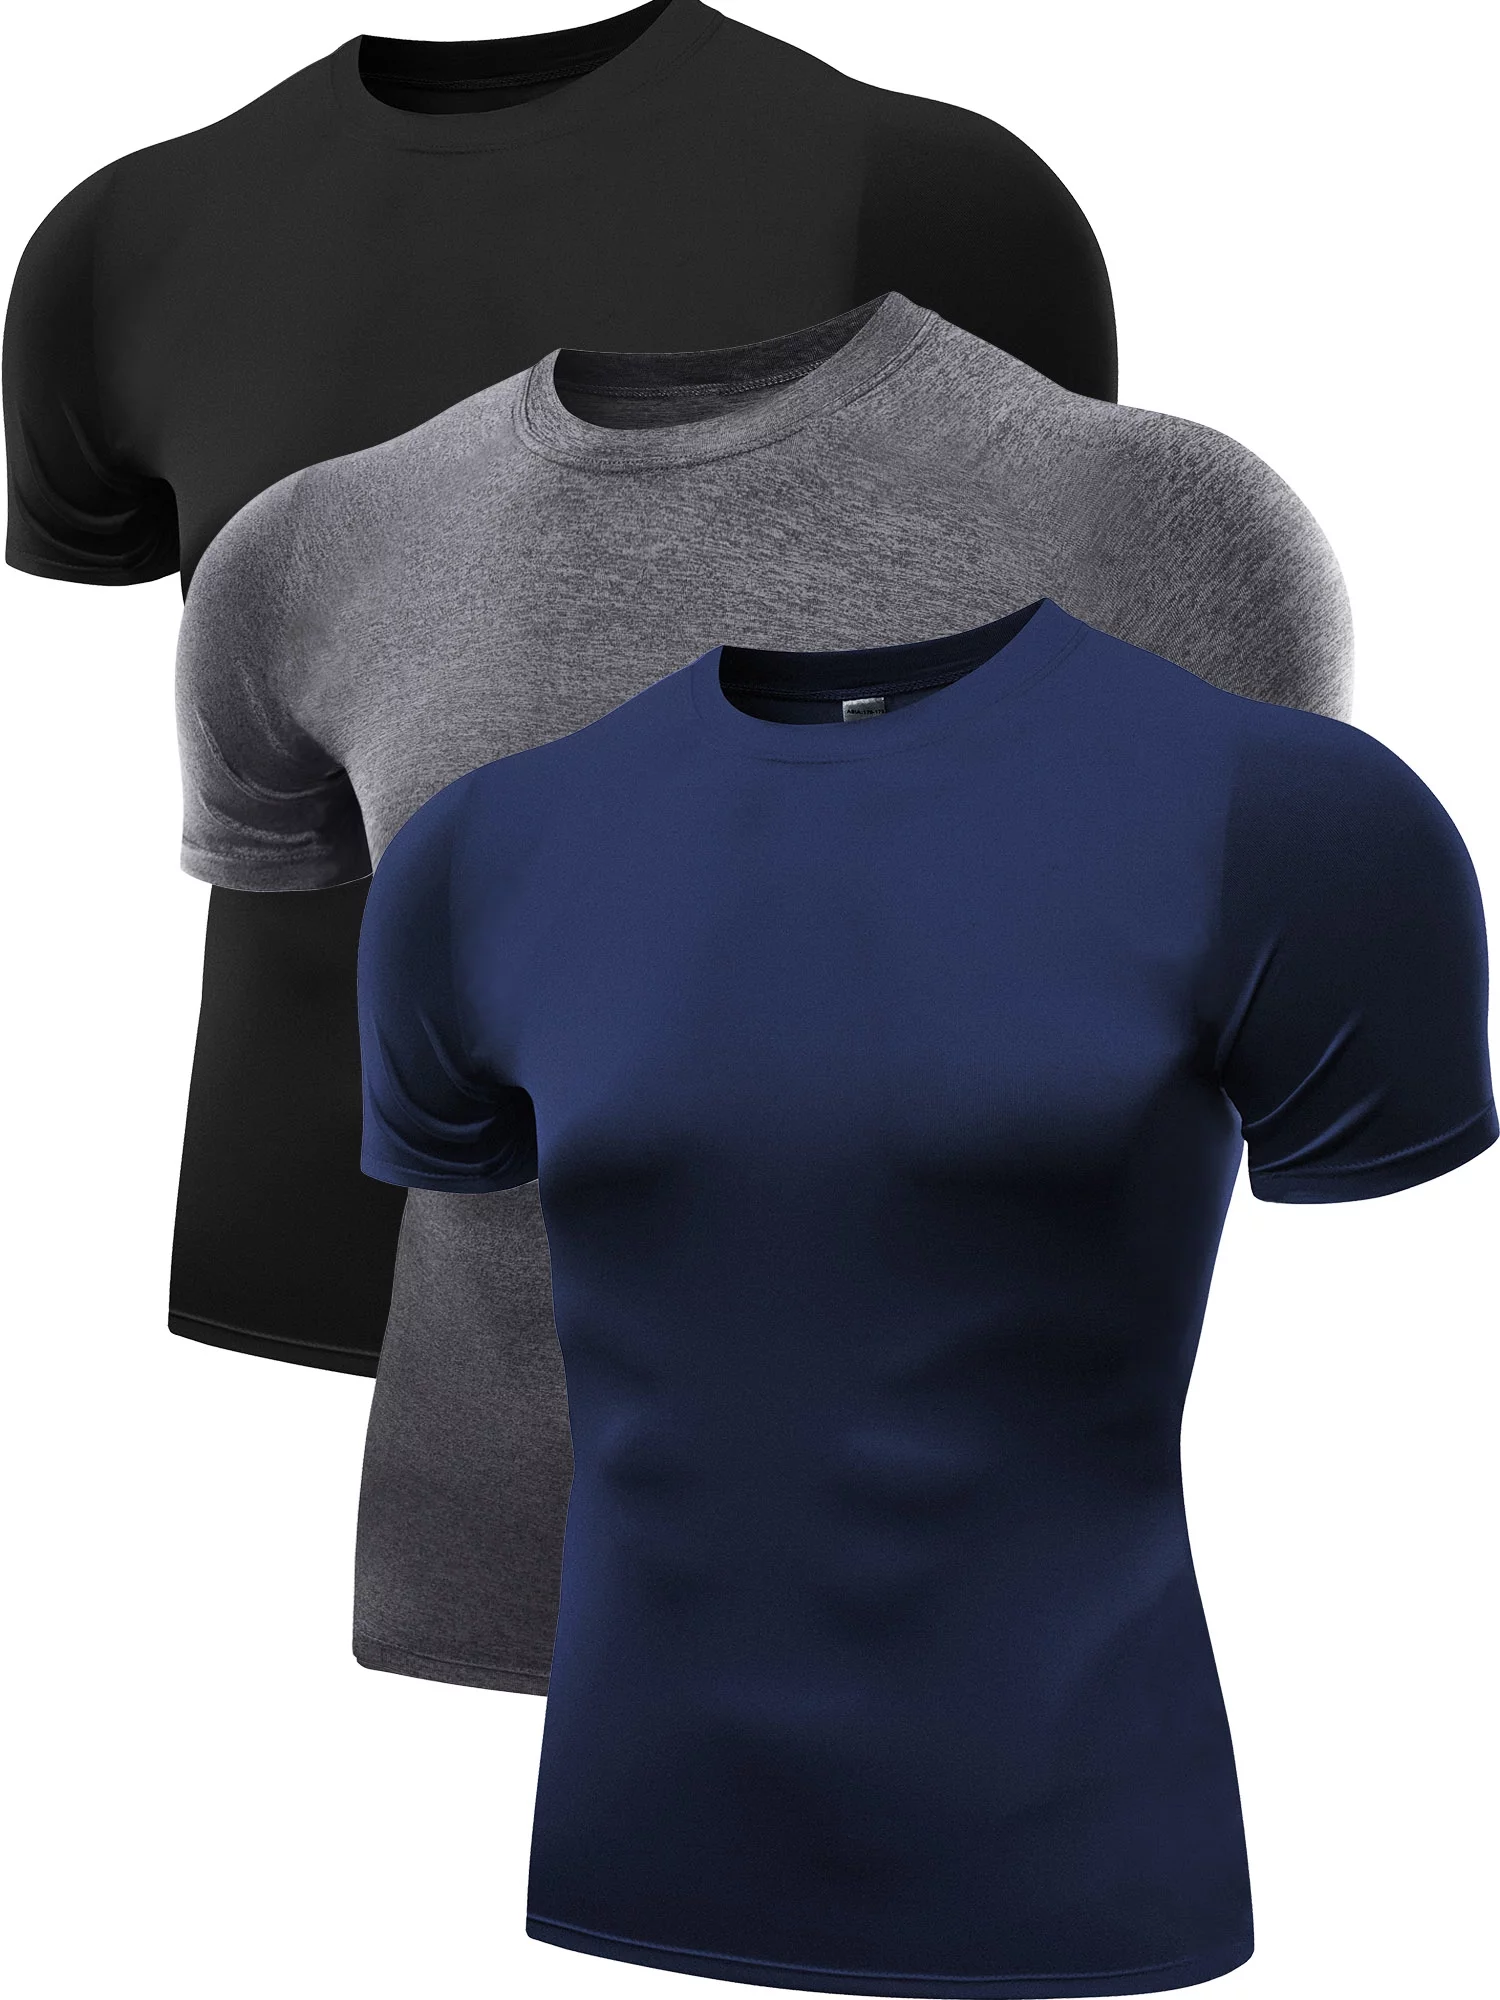 NELEUS Men's Athletic Compression Shirt Base Layer Tight Tops Short Sleeves 3 Pack,Black+Gray+Navy Blue,US Size 2XL